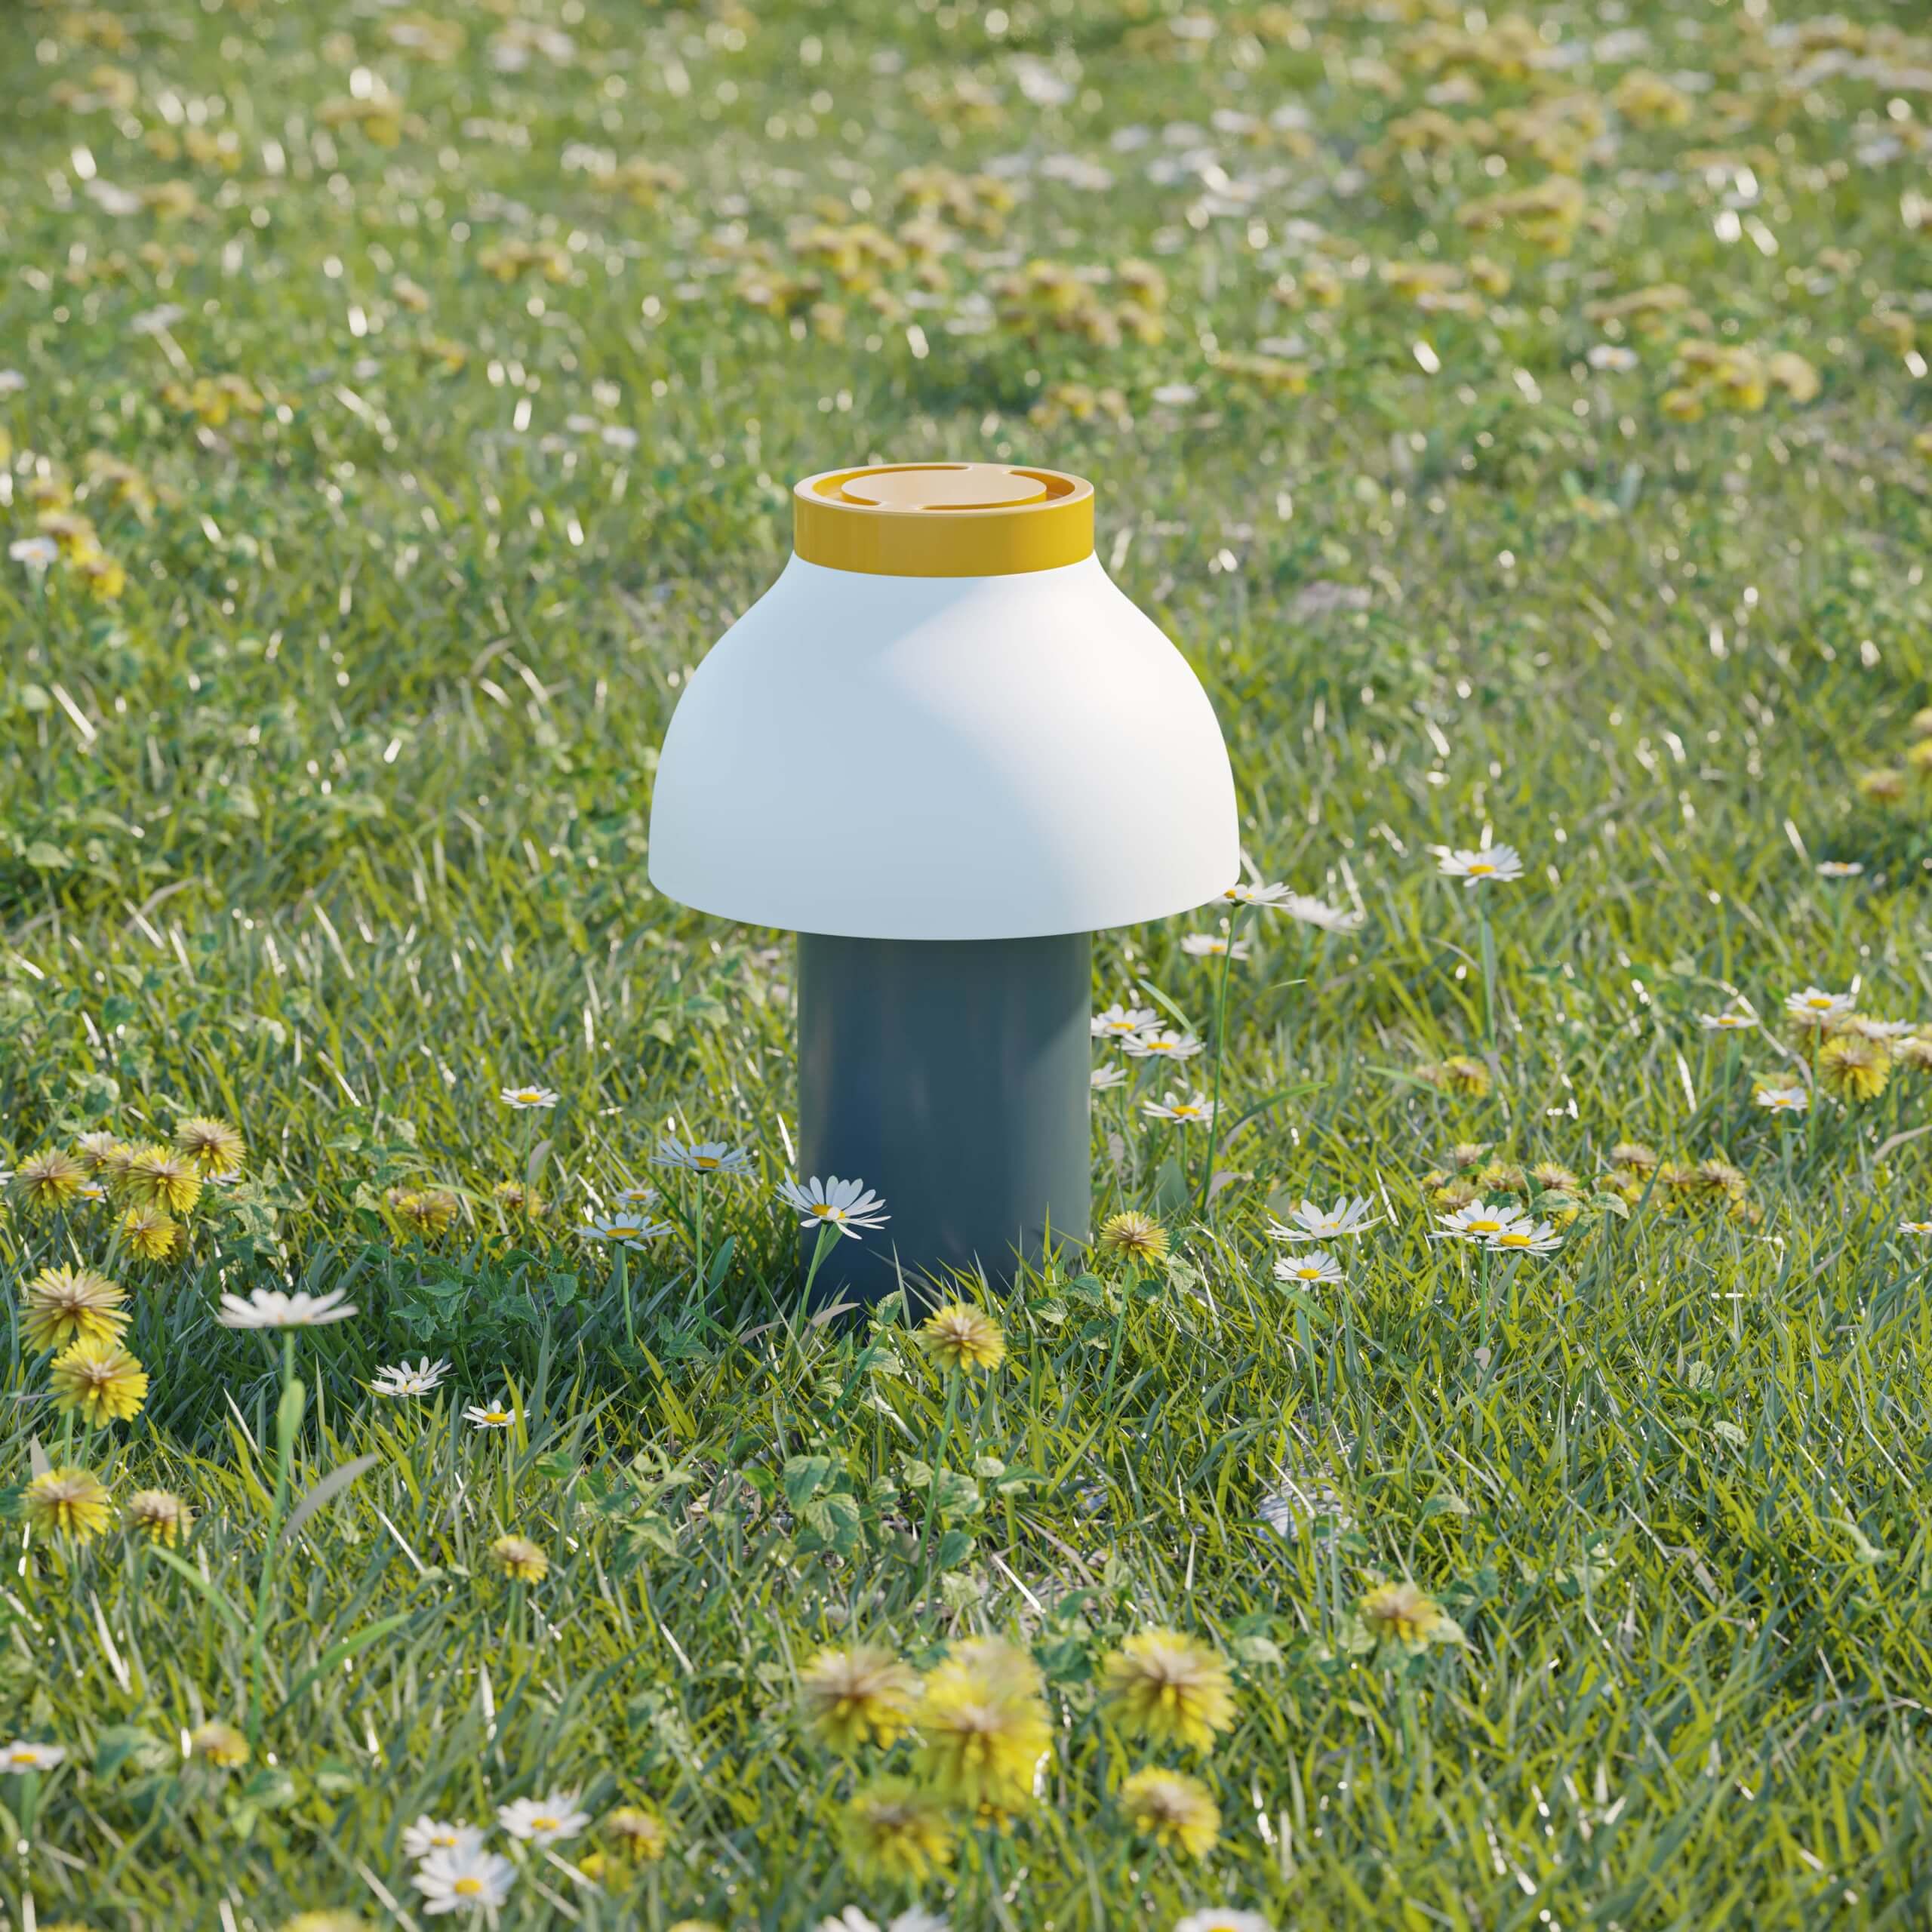 3D Visualization for an Outdoor Lamp Design